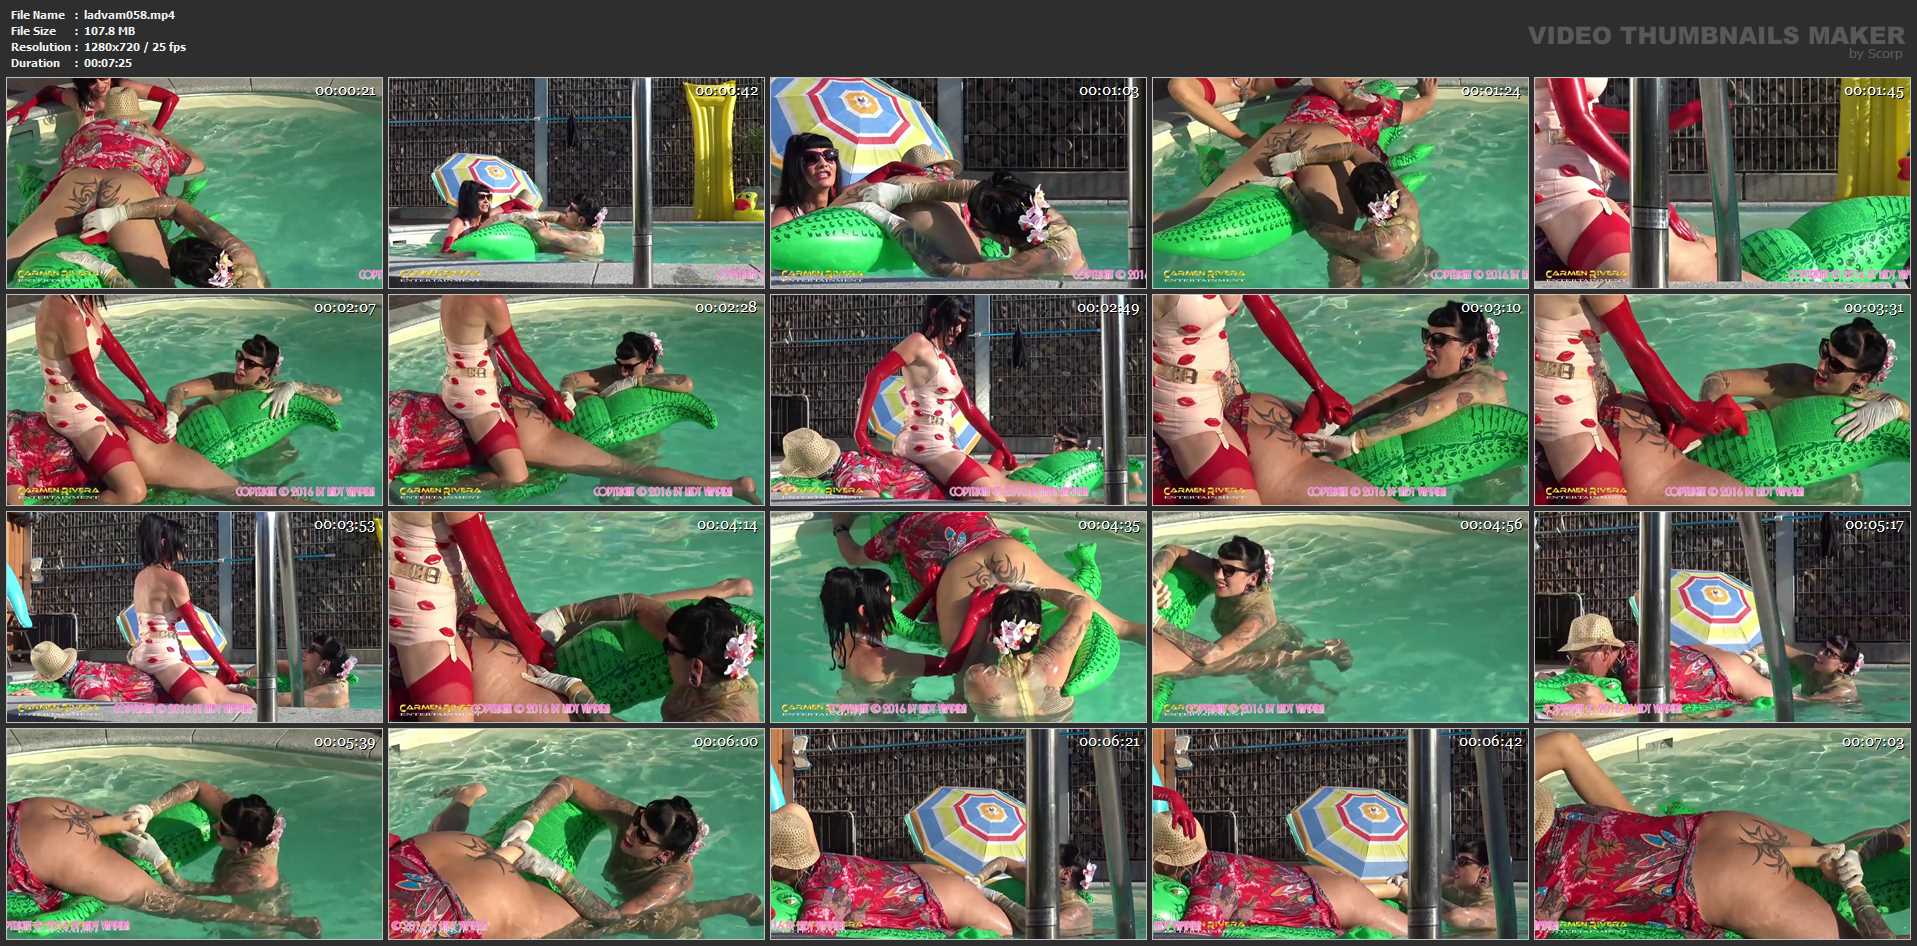 Lady VampiraCarmen Rivera, Lady Vampira In Scene: Celebrating a pool party with slaves in the Femdom Empire Part 7 - PIN UP DOMINATION BY LADY VAMPIRA - HD/720p/MP4